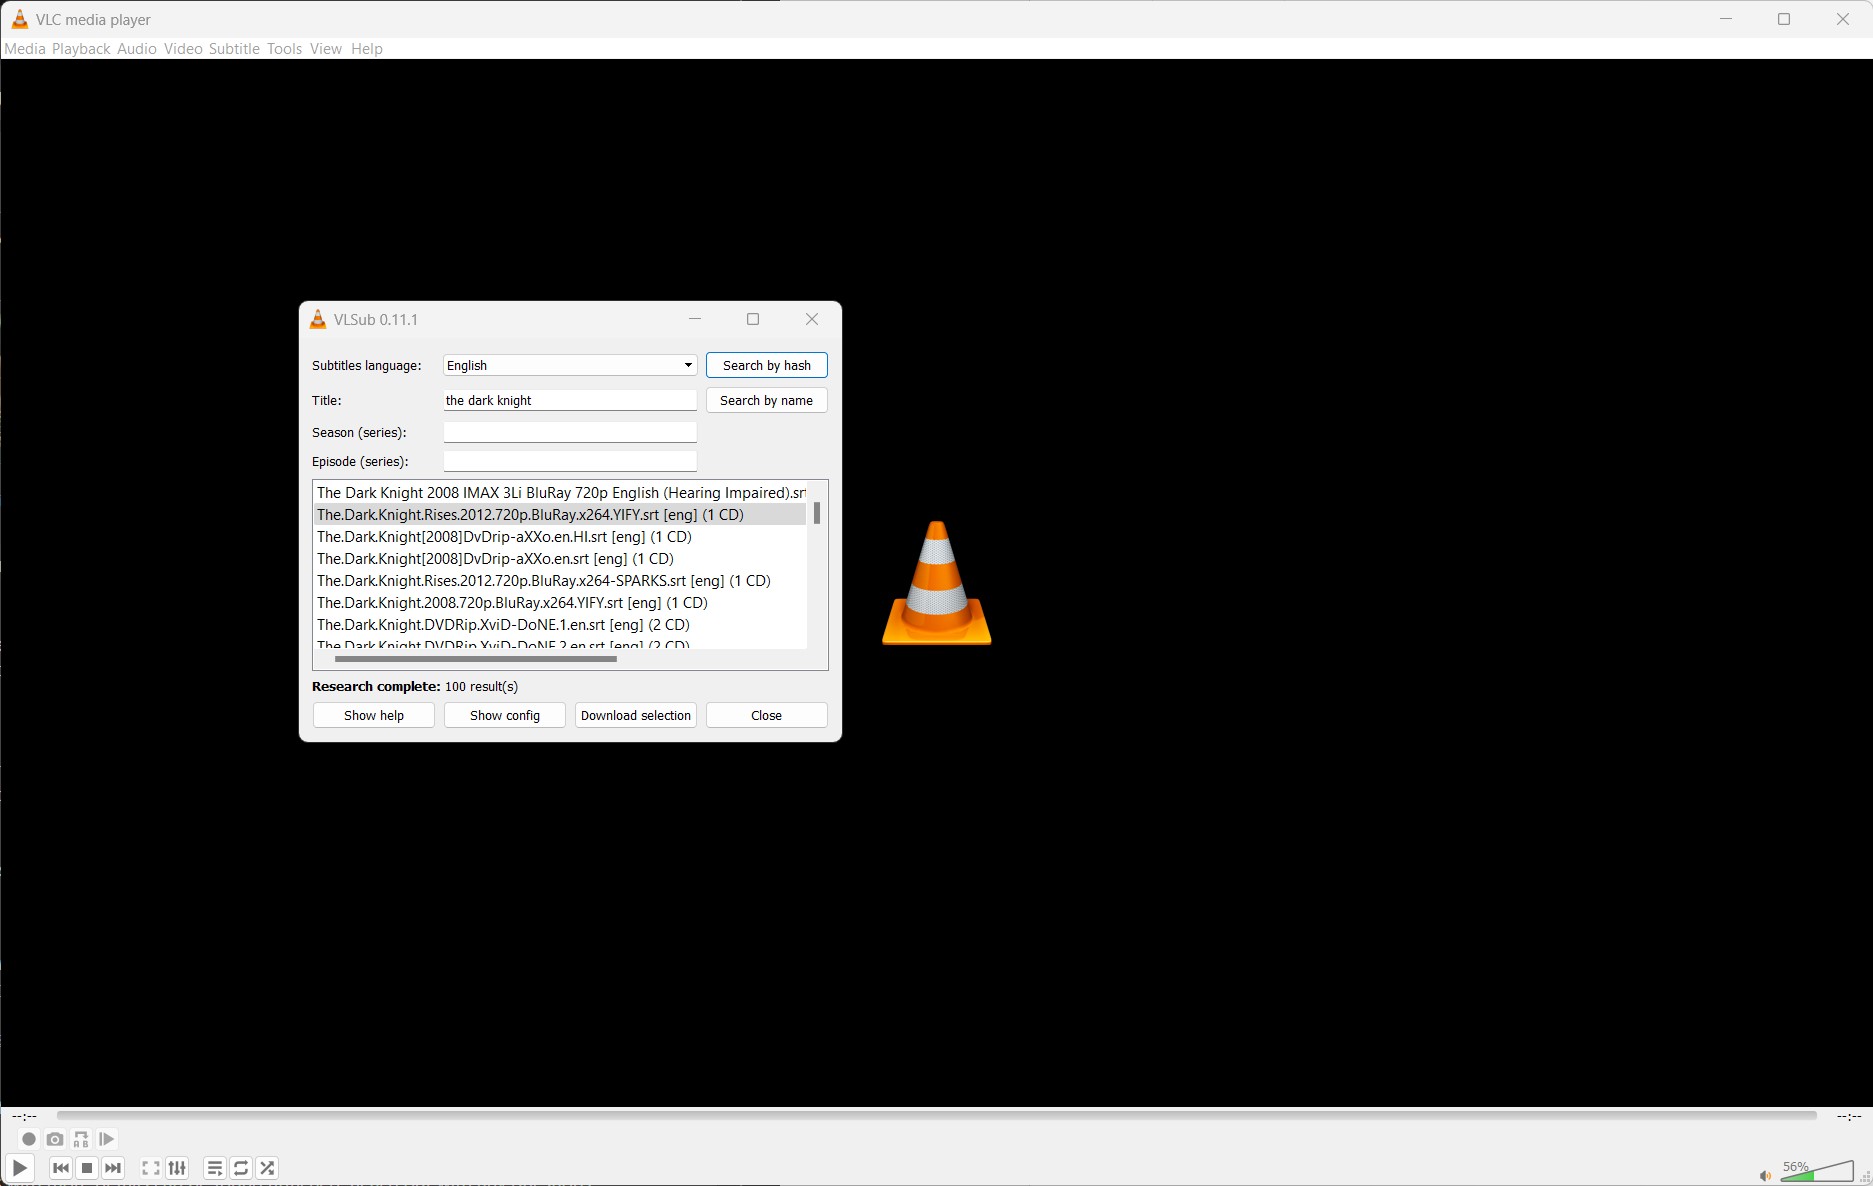 The VLSub feature in VLC media player.